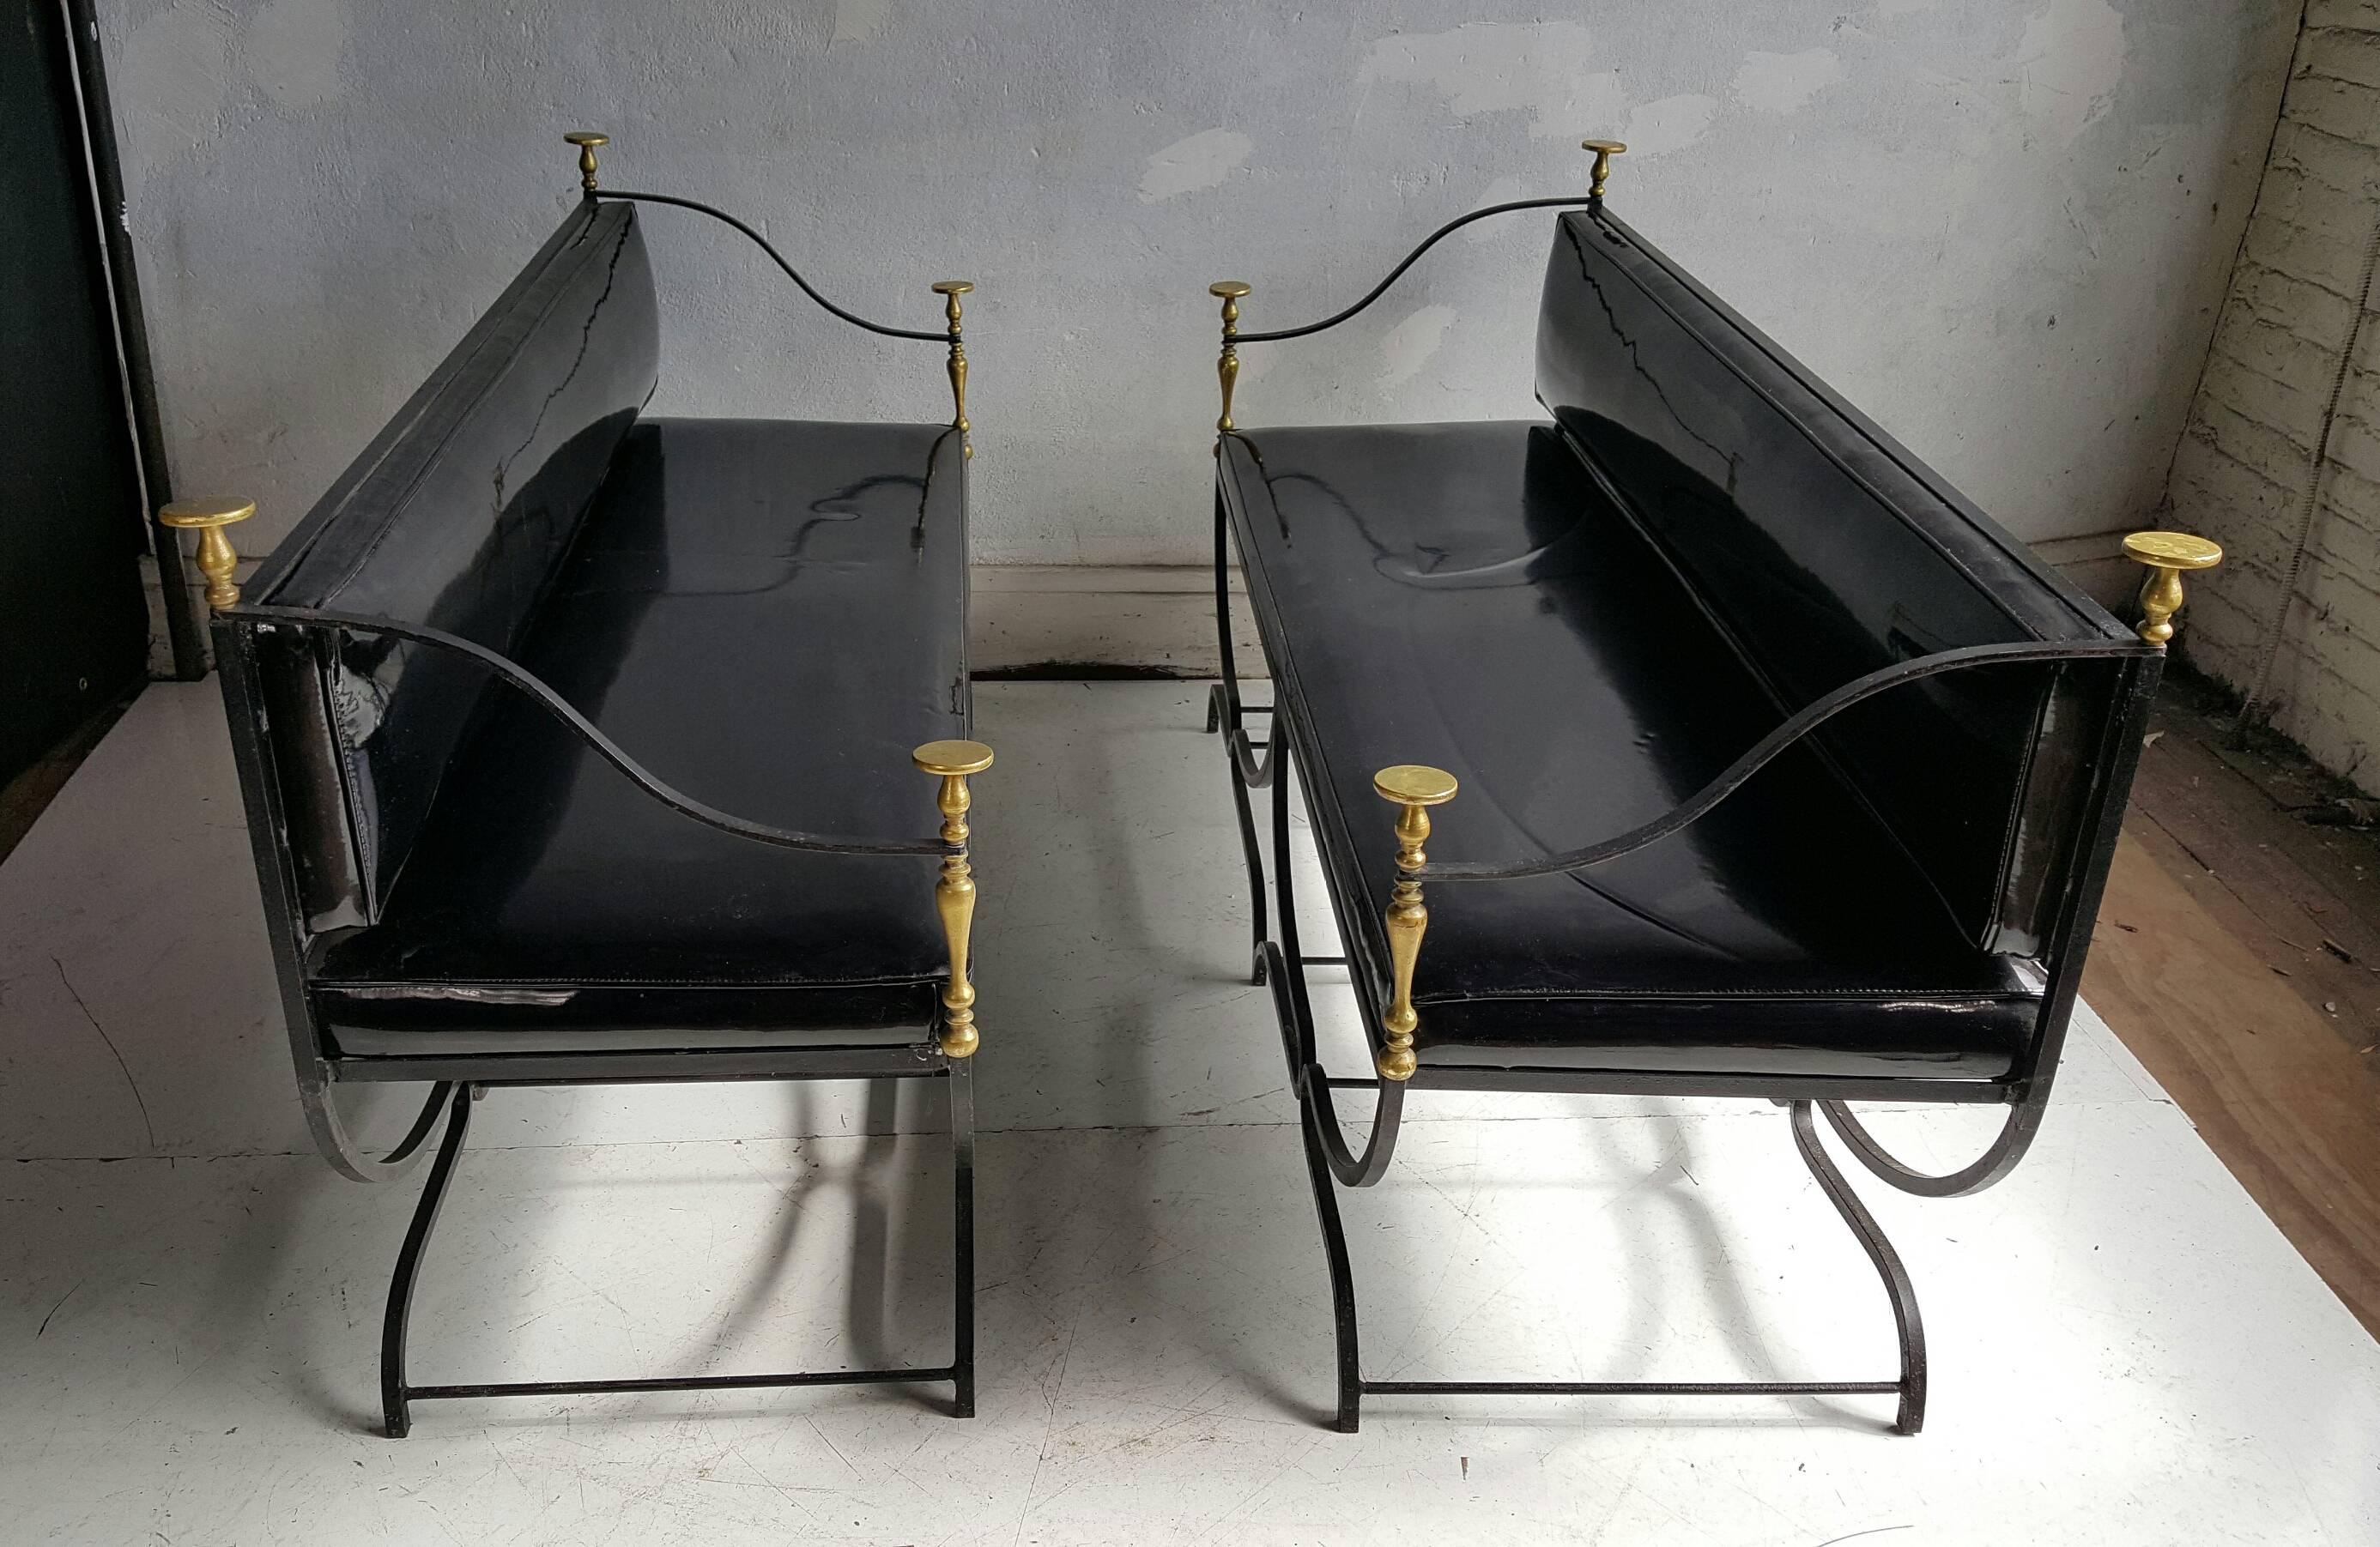 Rare matched pair of Italian Mid-Century iron and brass Savonarola or Curule settees whose form dates to the Renaissance. This particular example features exaggerated brass spheres and finials. The settee's retain their original black patent leather